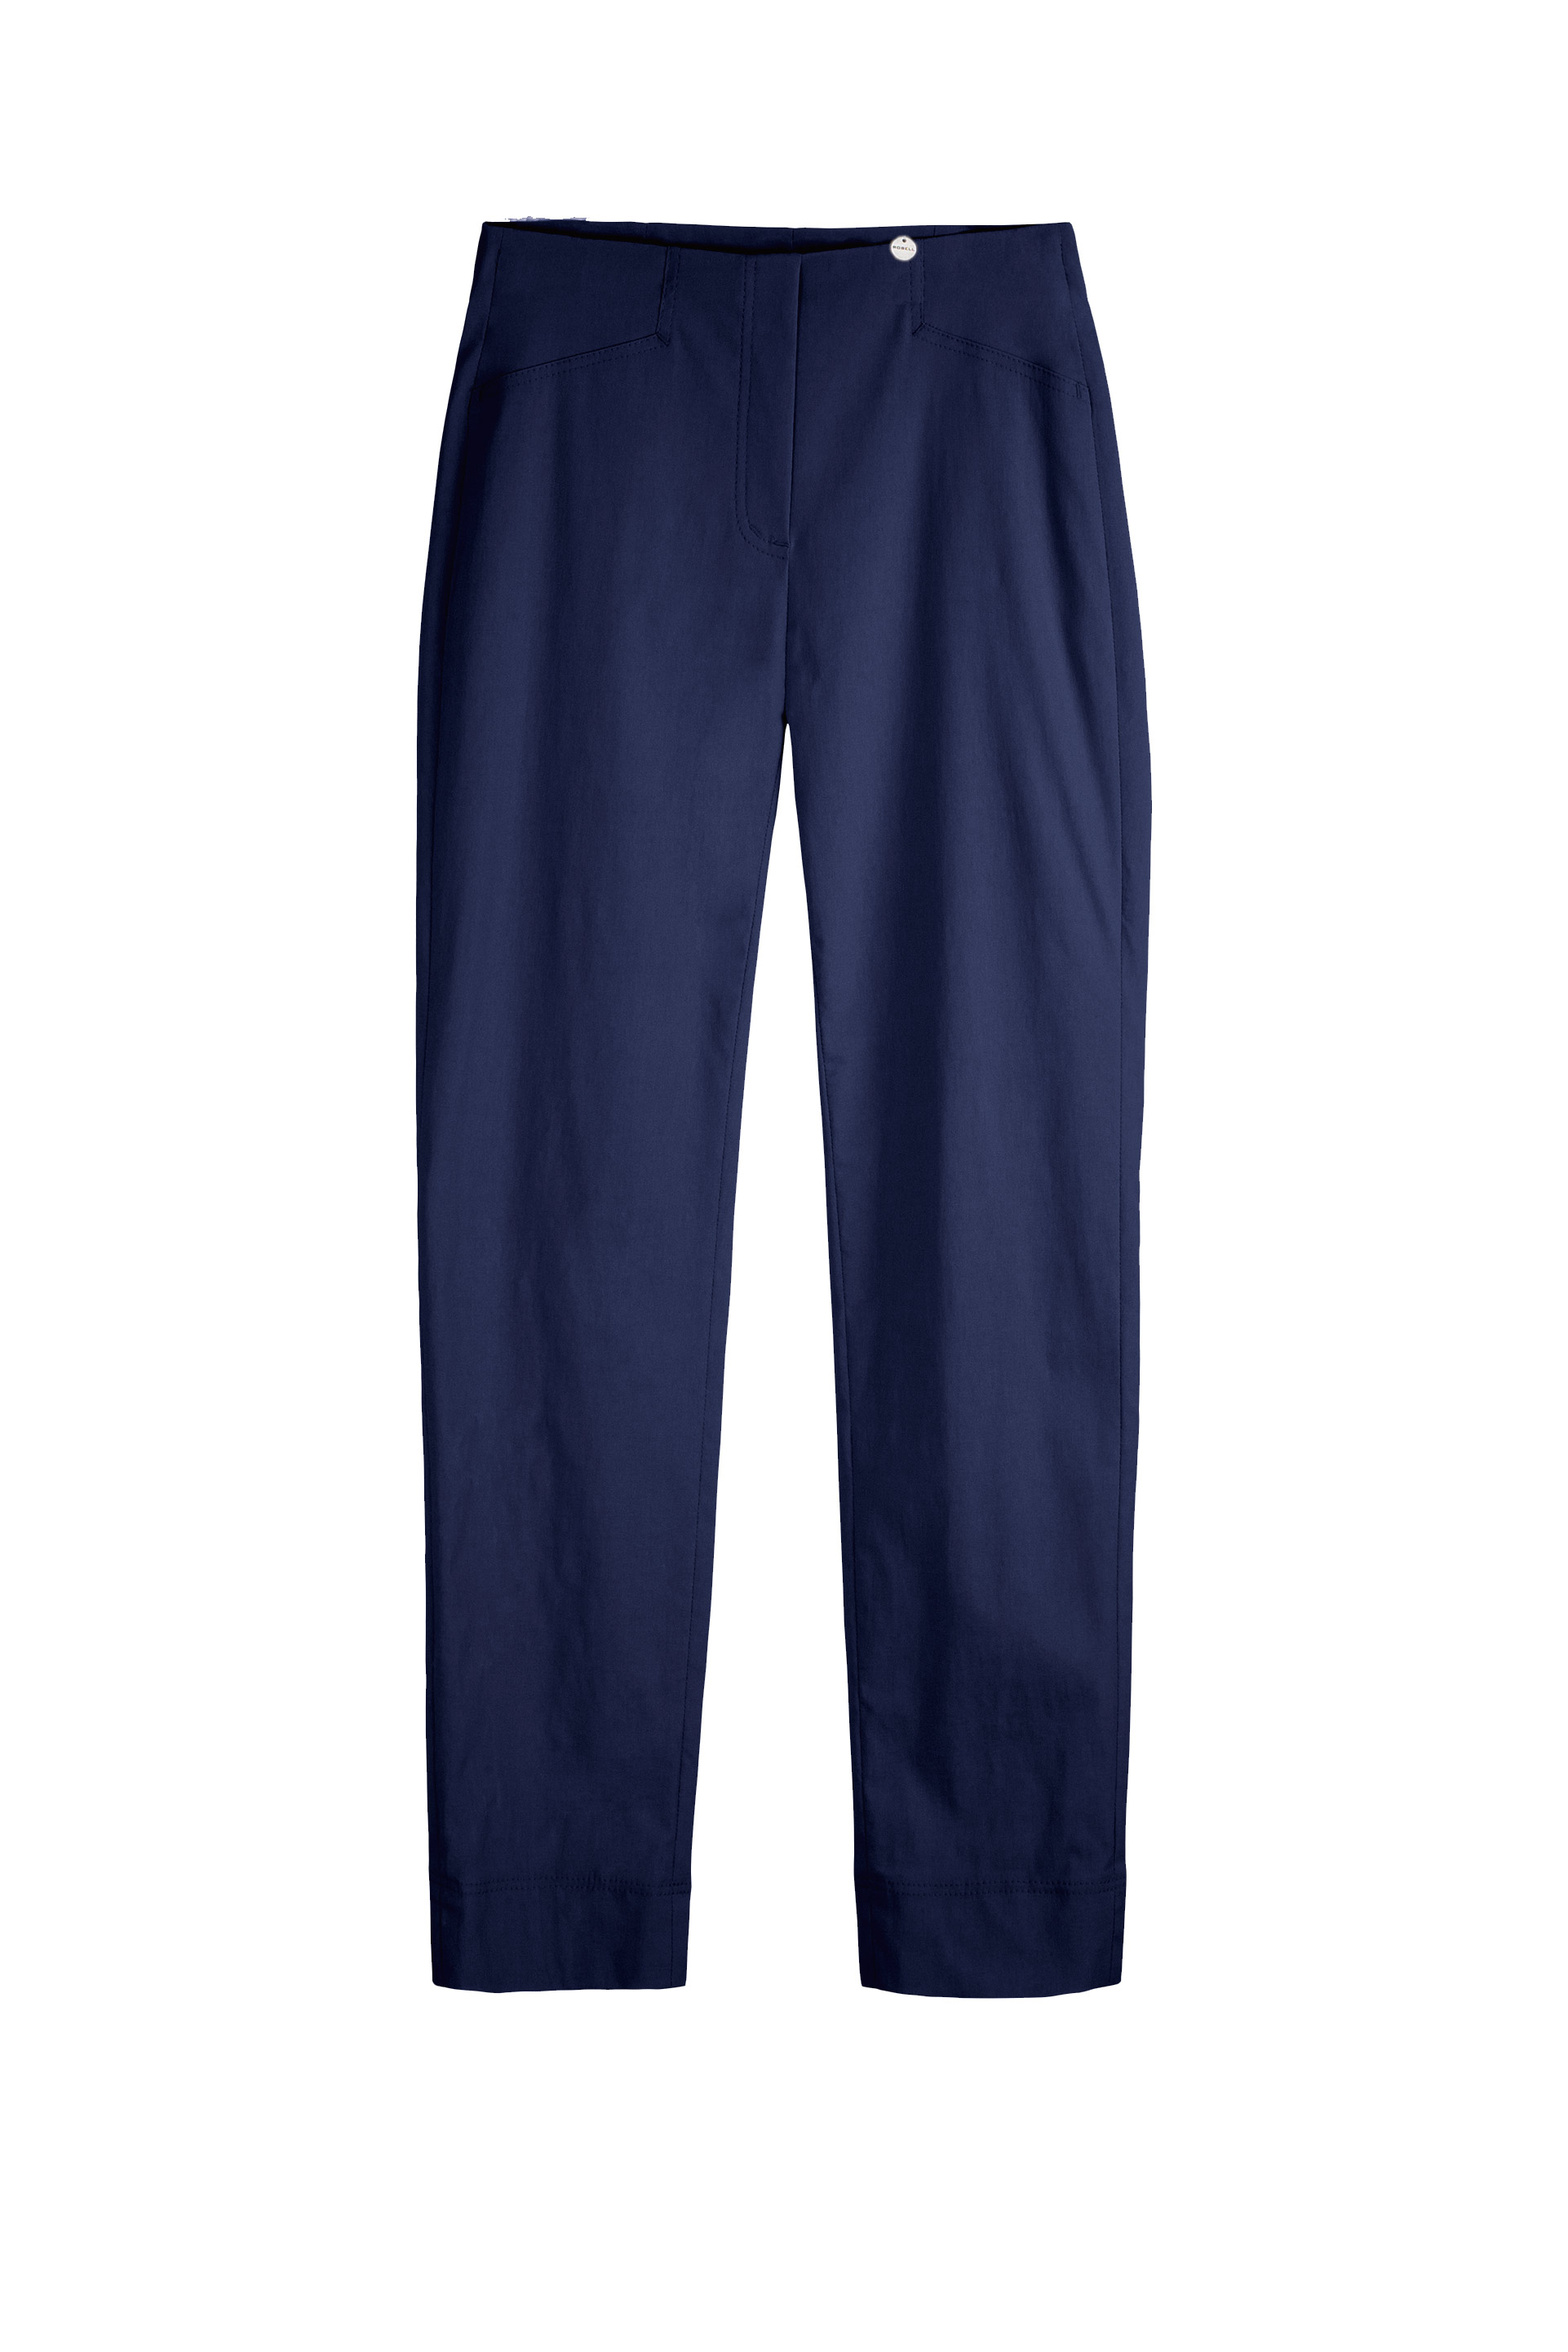 68157_rosa_78_trousers_french_navy.jpg